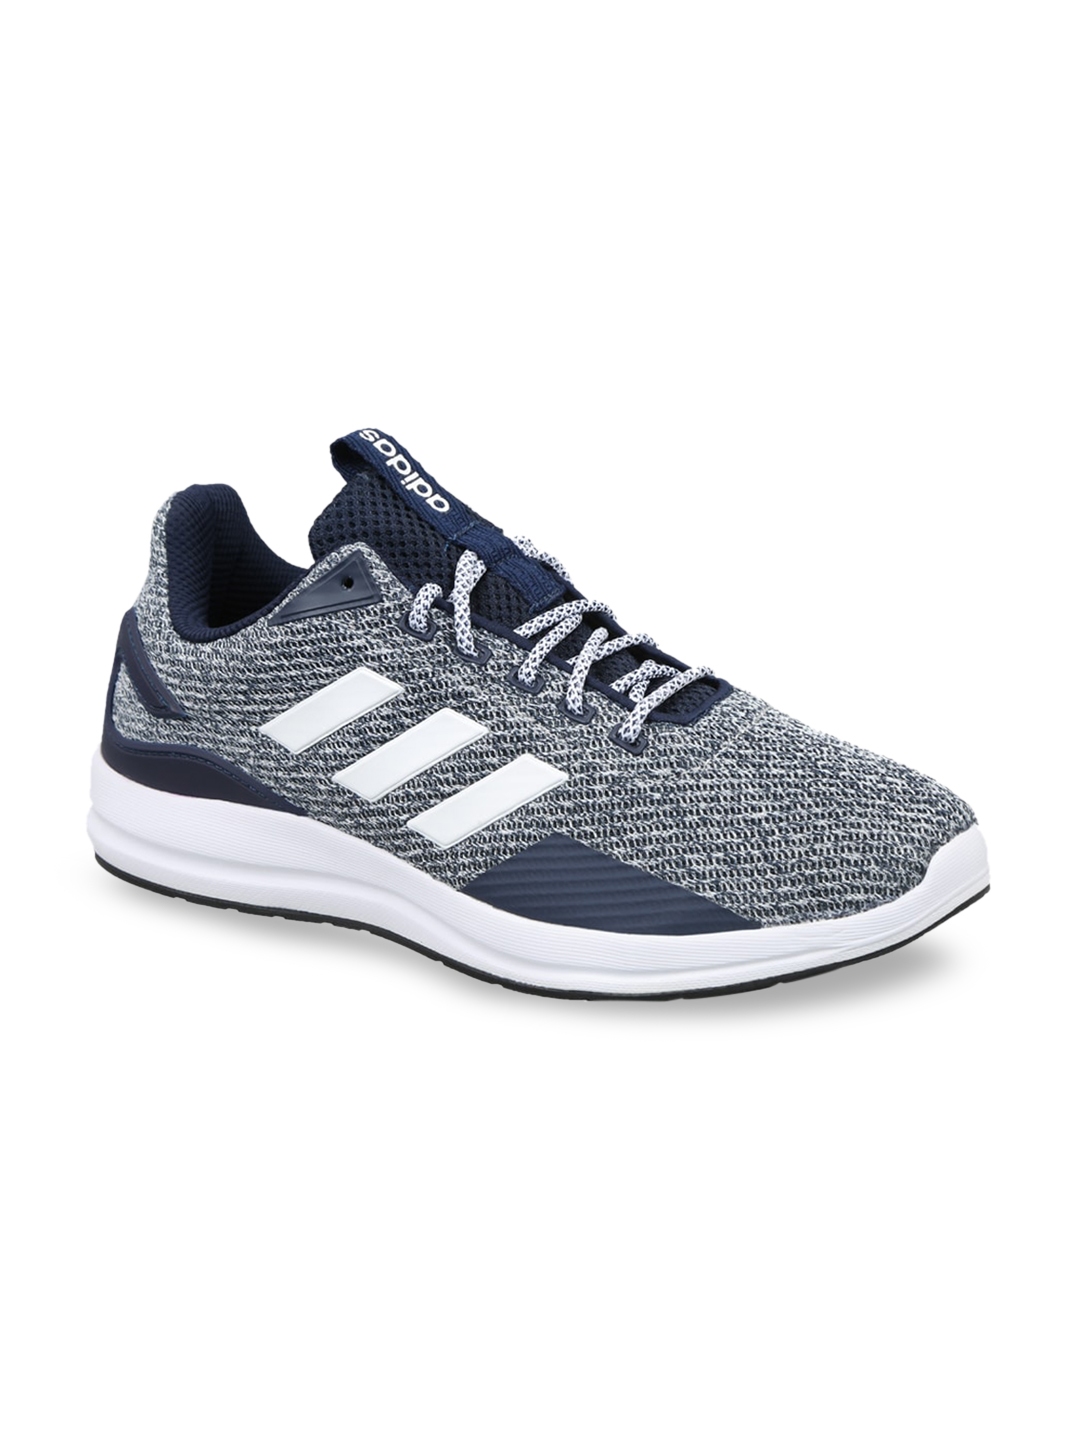 Buy ADIDAS Men Navy Blue Synthetic Running Shoes - Sports Shoes for Men ...